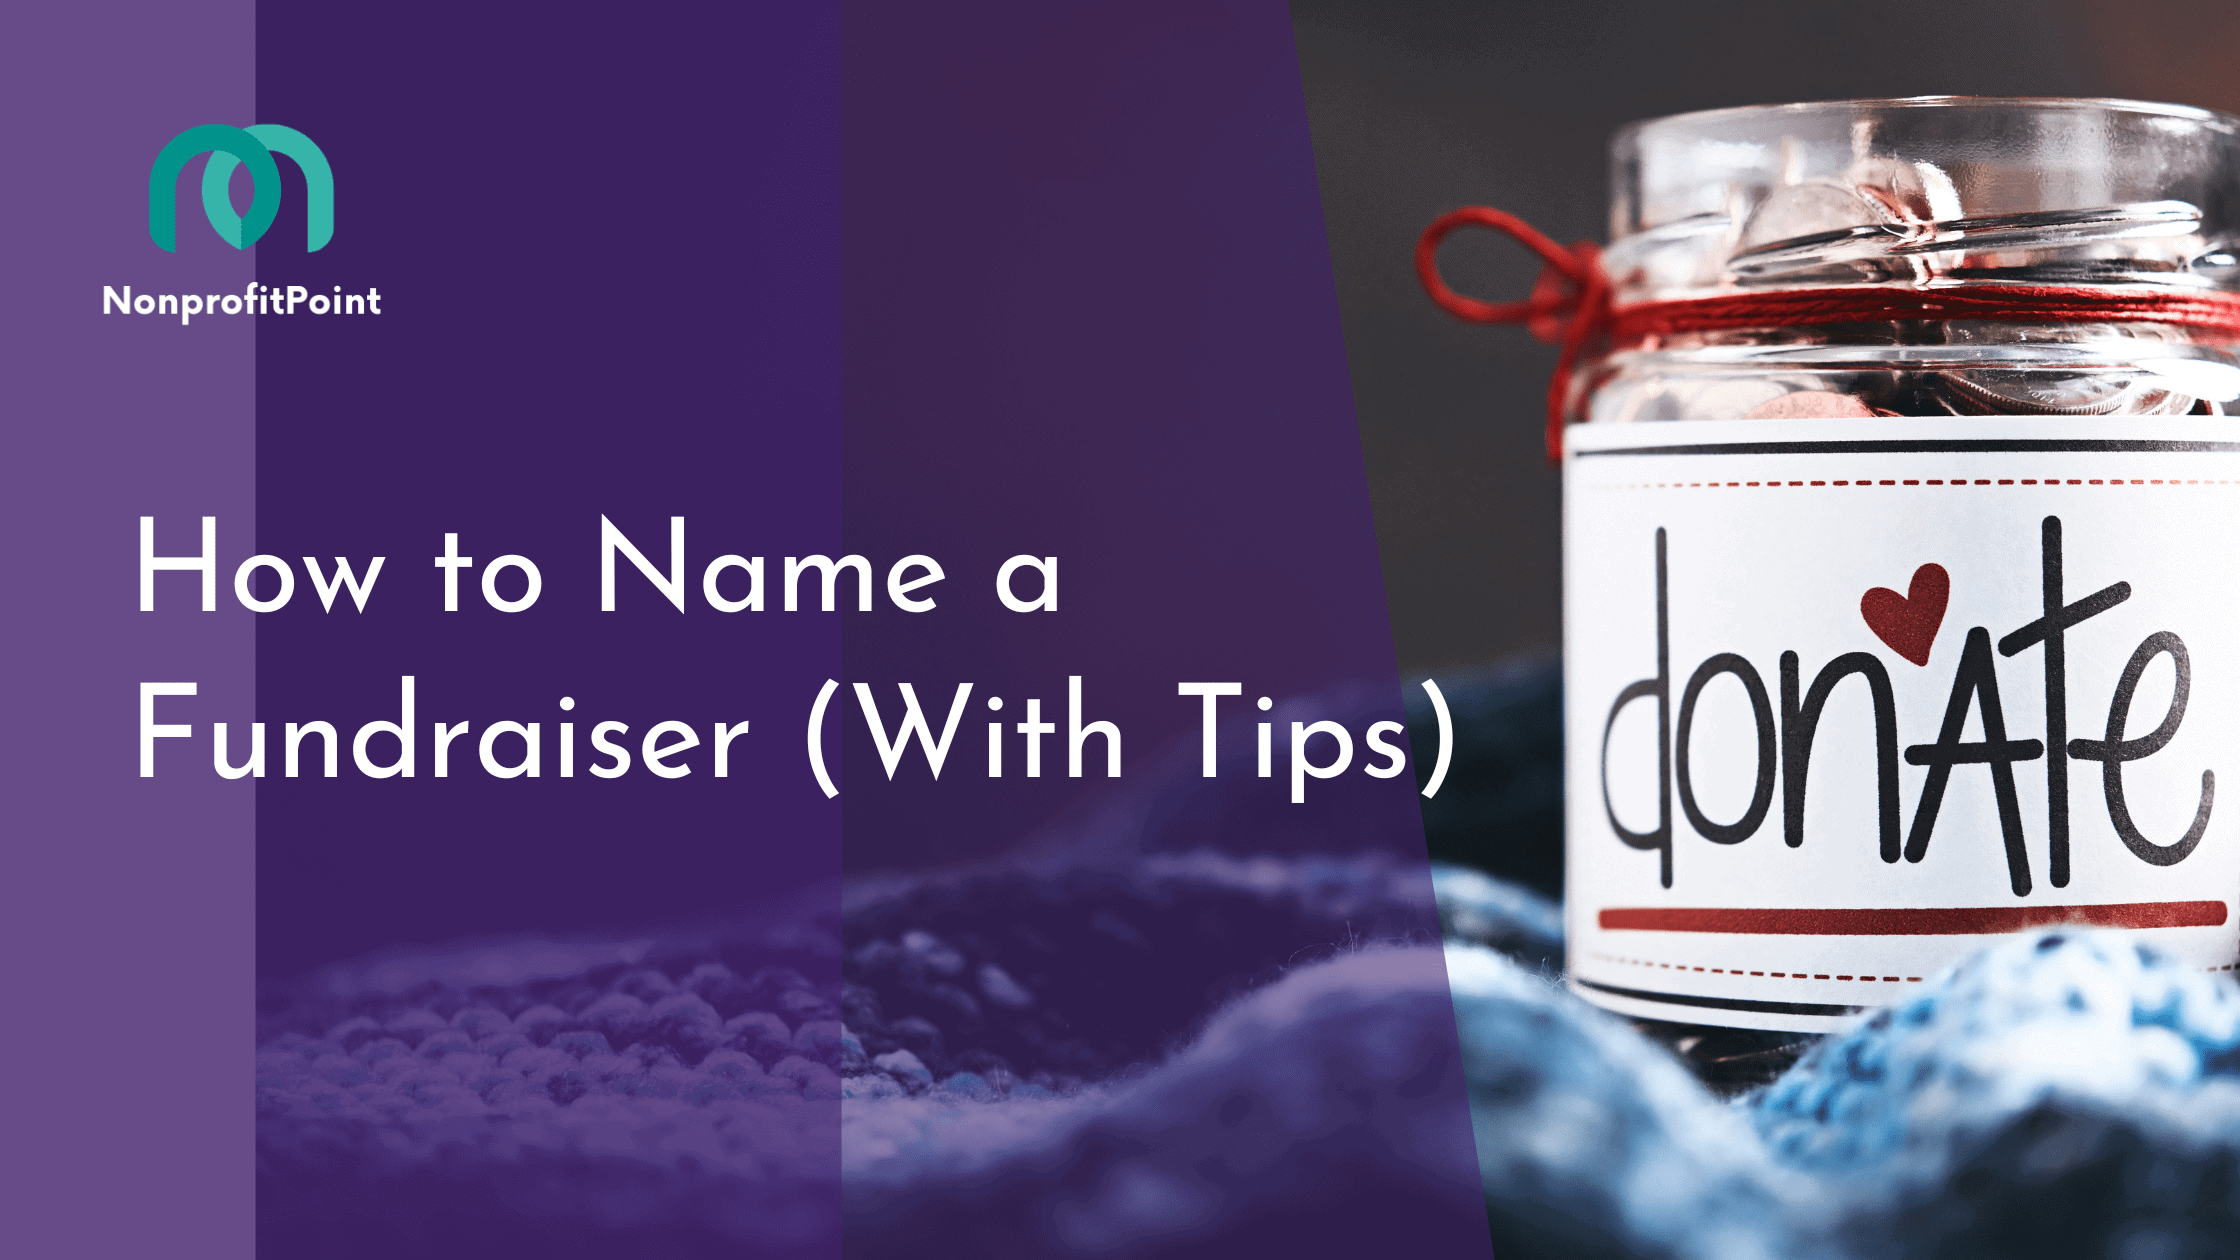 How to Name a Fundraiser (With Tips)